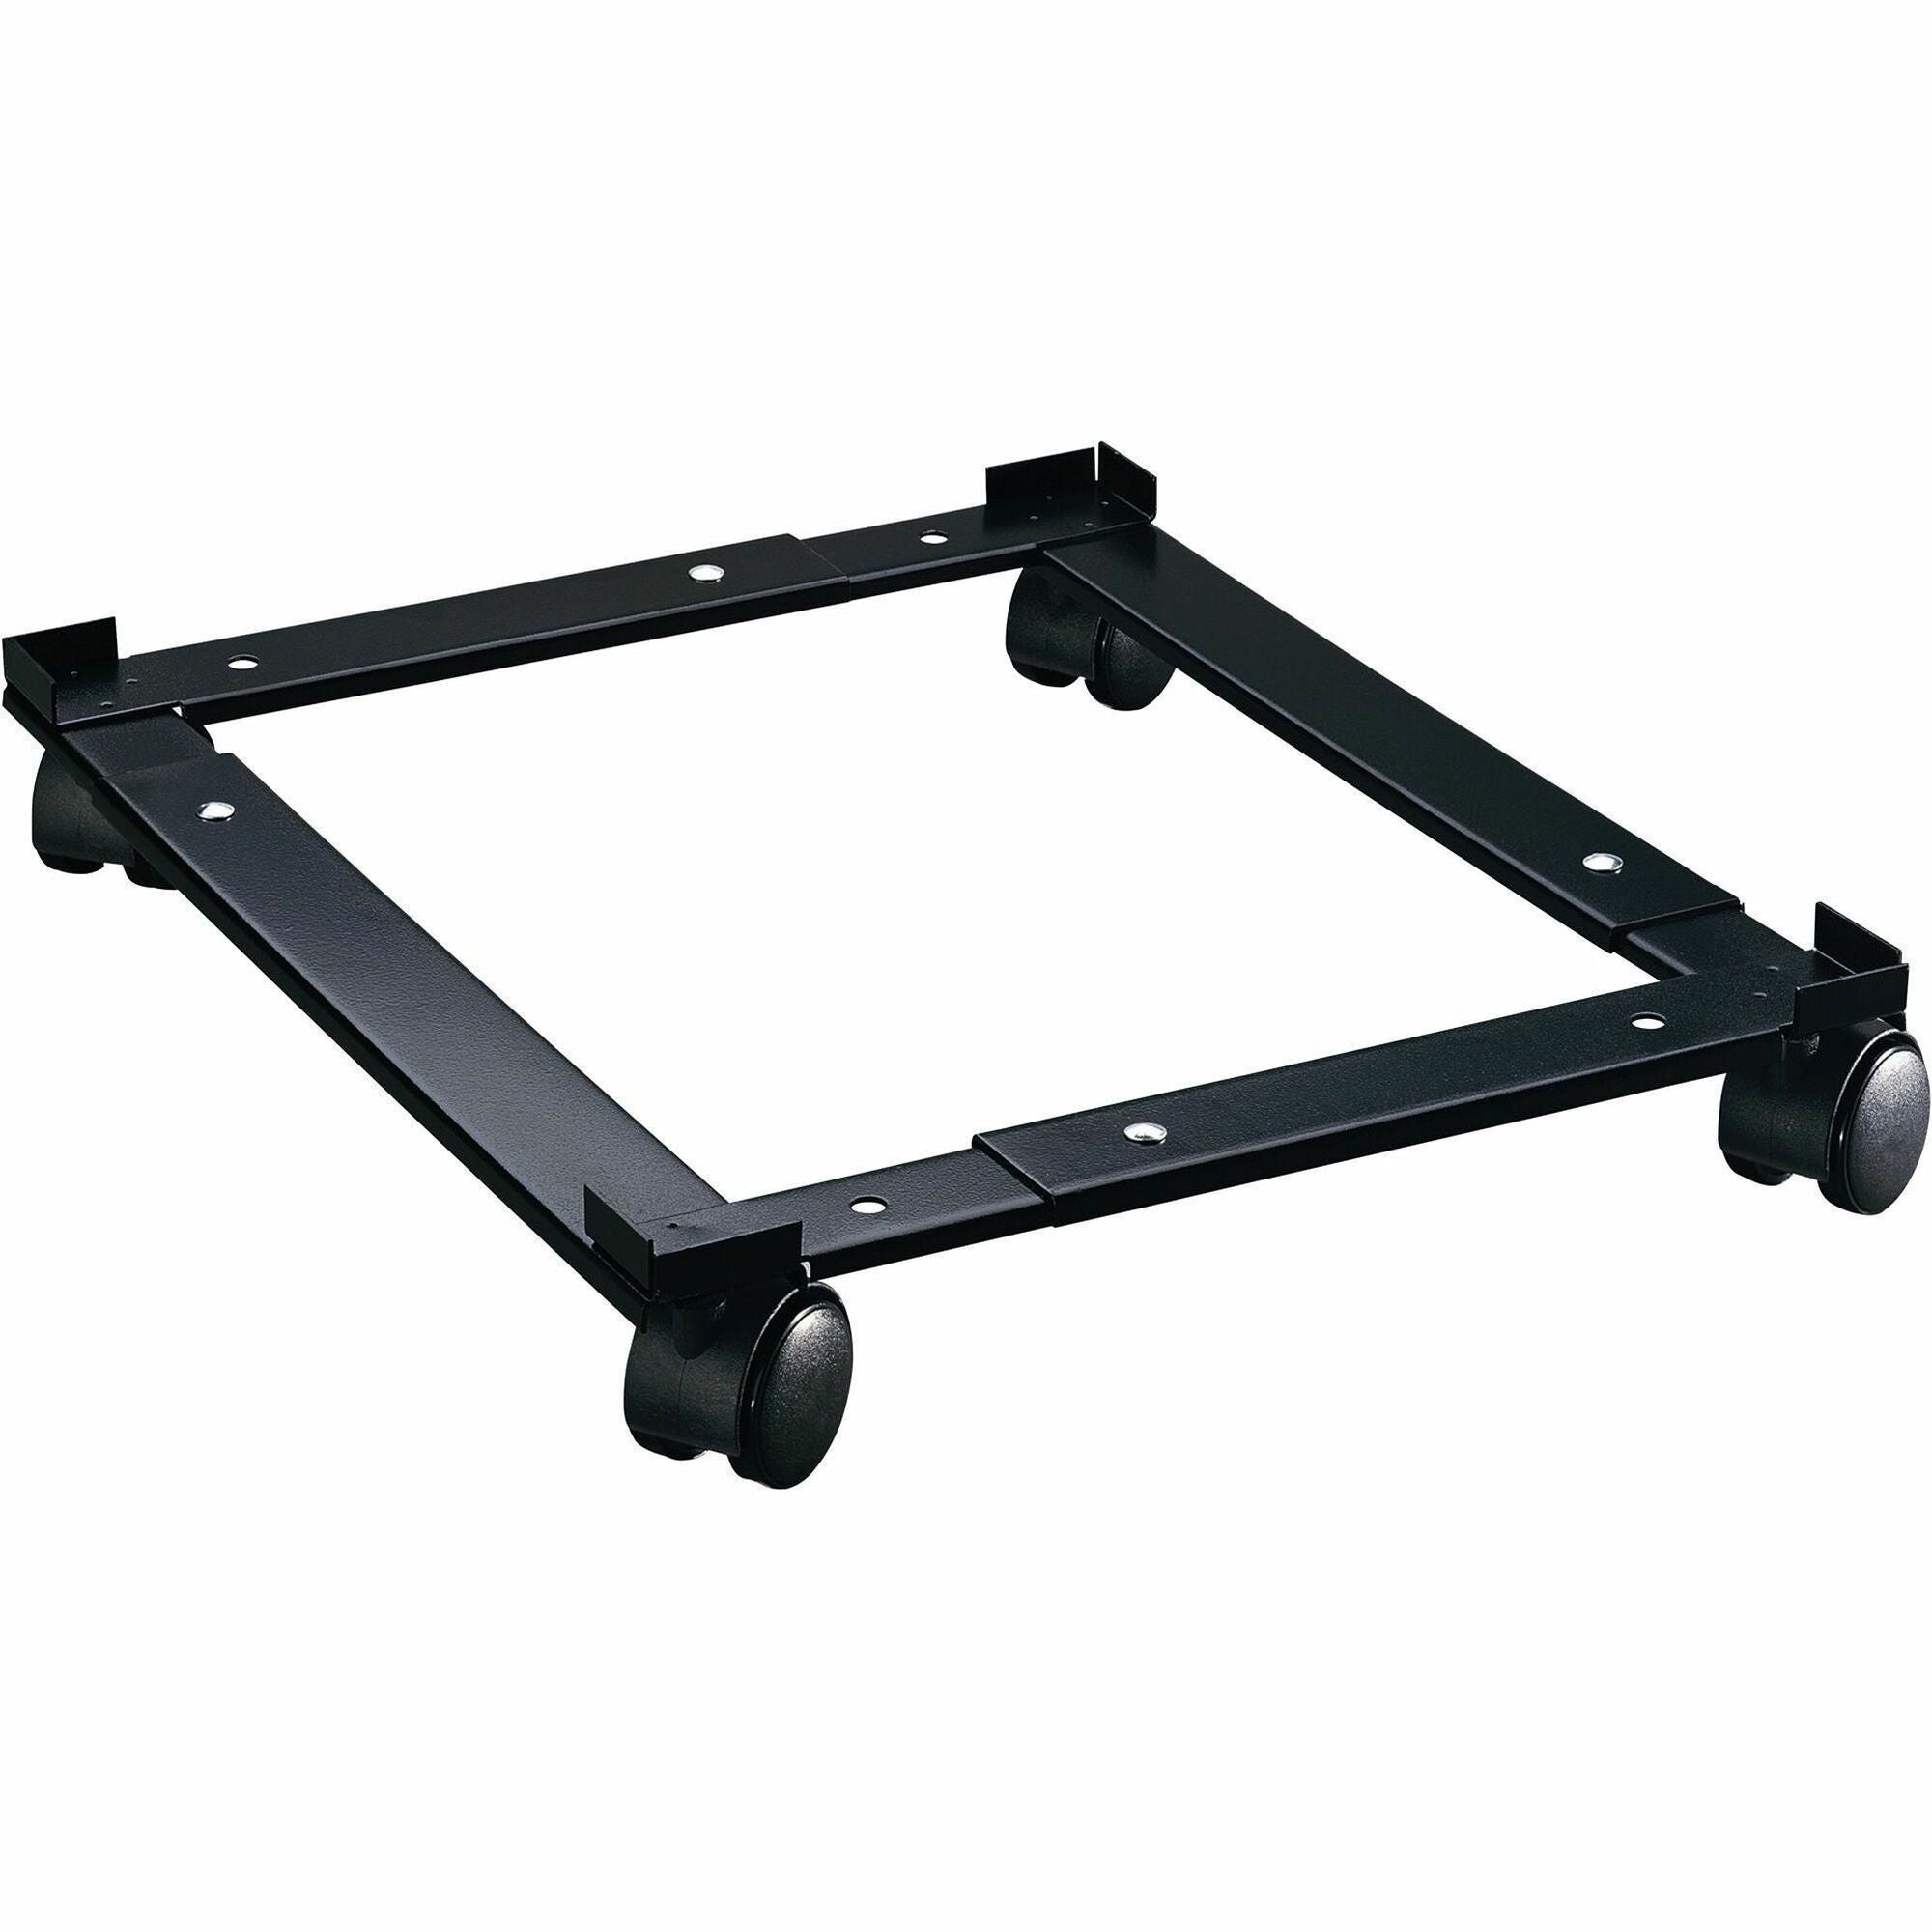 Lorell Commercial-Grade File Caddy - 400 lb Capacity - 4 Casters - Steel - x 16.6" Width x 11.4" Depth x 4" Height - Black - 1 Each - 